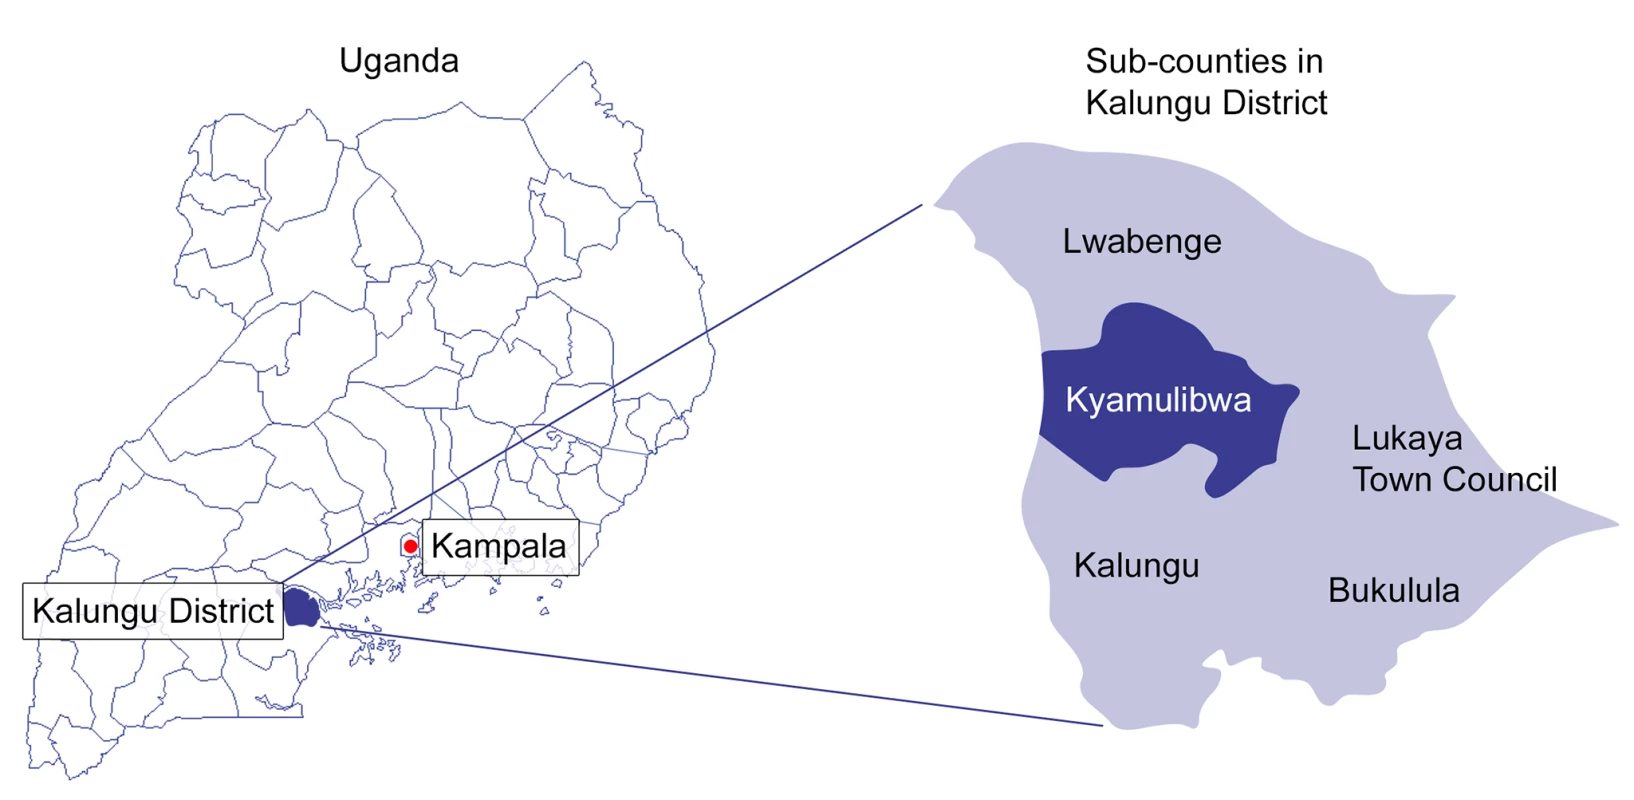 Map of districts within Uganda and sub-counties within Kalungu District.